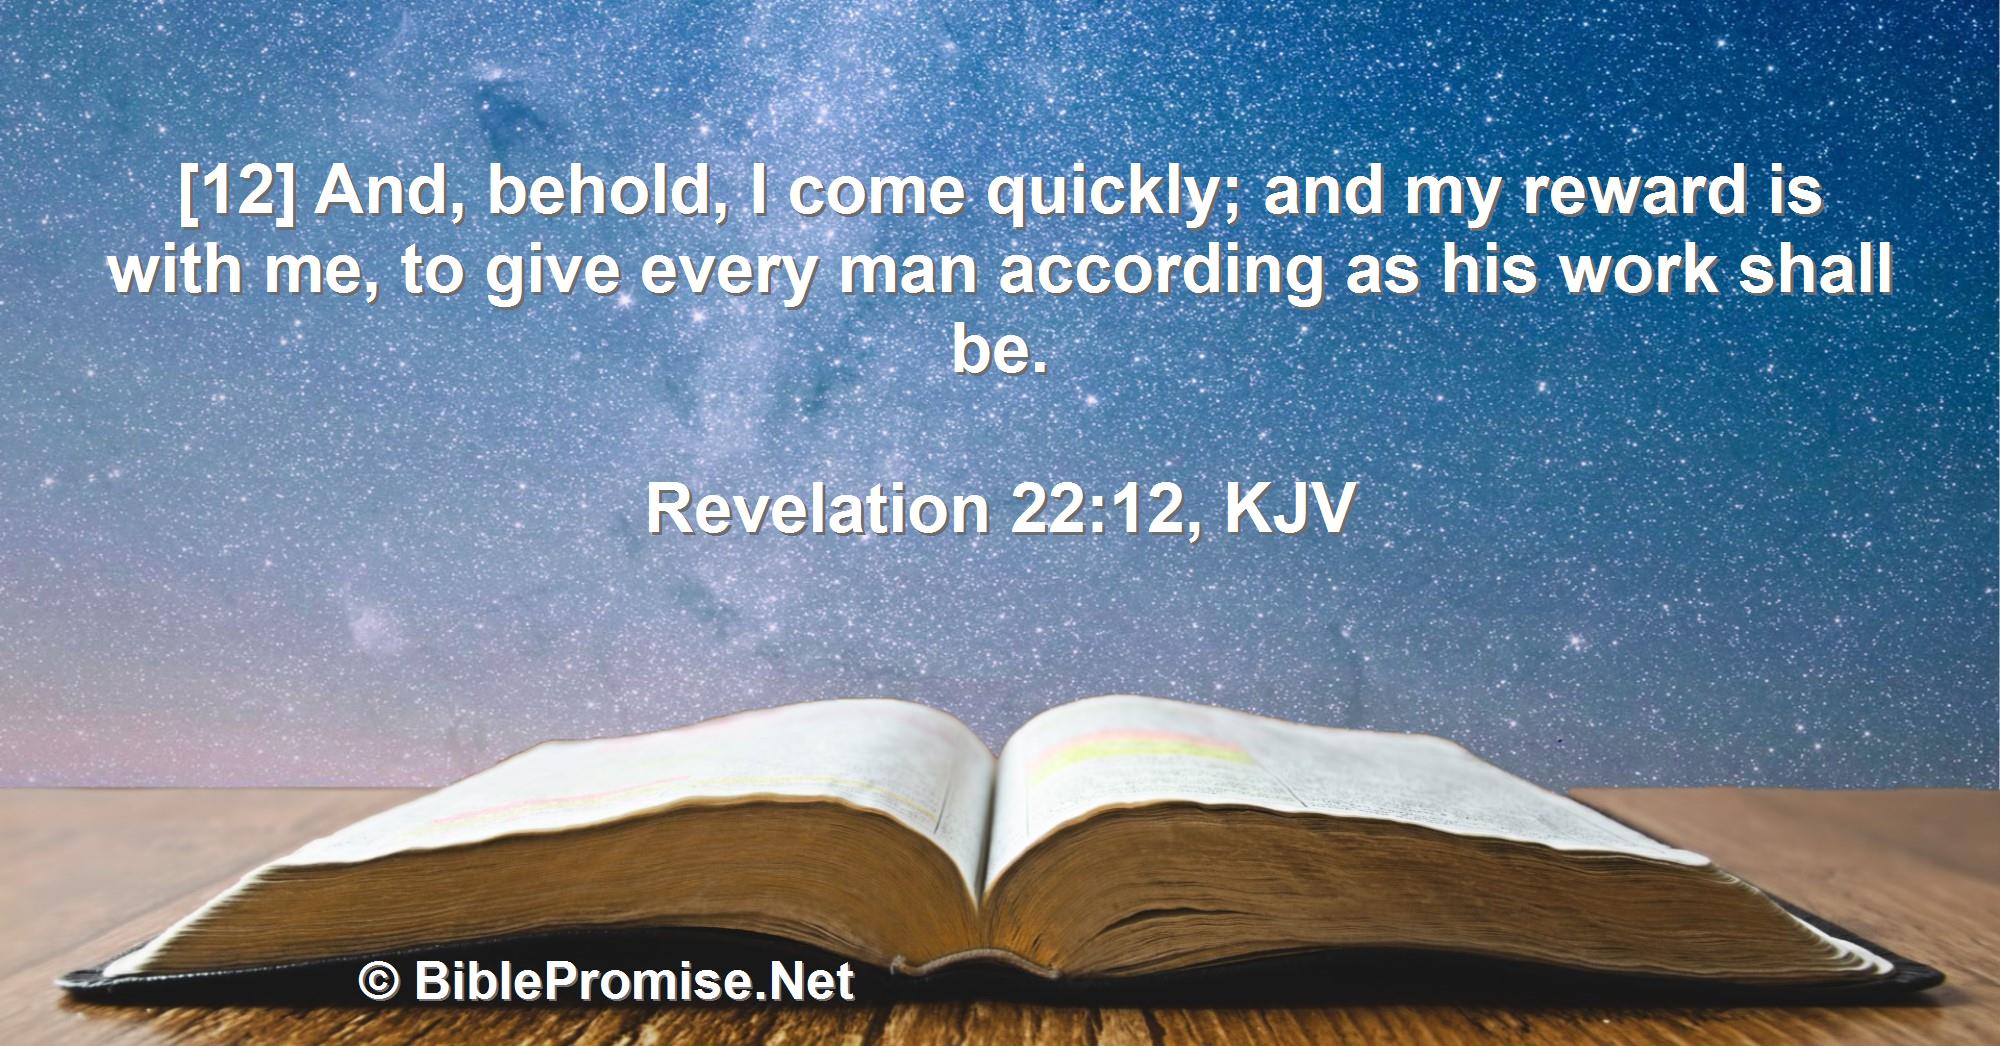 Saturday, September 24, 2022 - Revelation 22:12 (KJV) - Bible promise that Jesus is coming quickly with his reward for us.